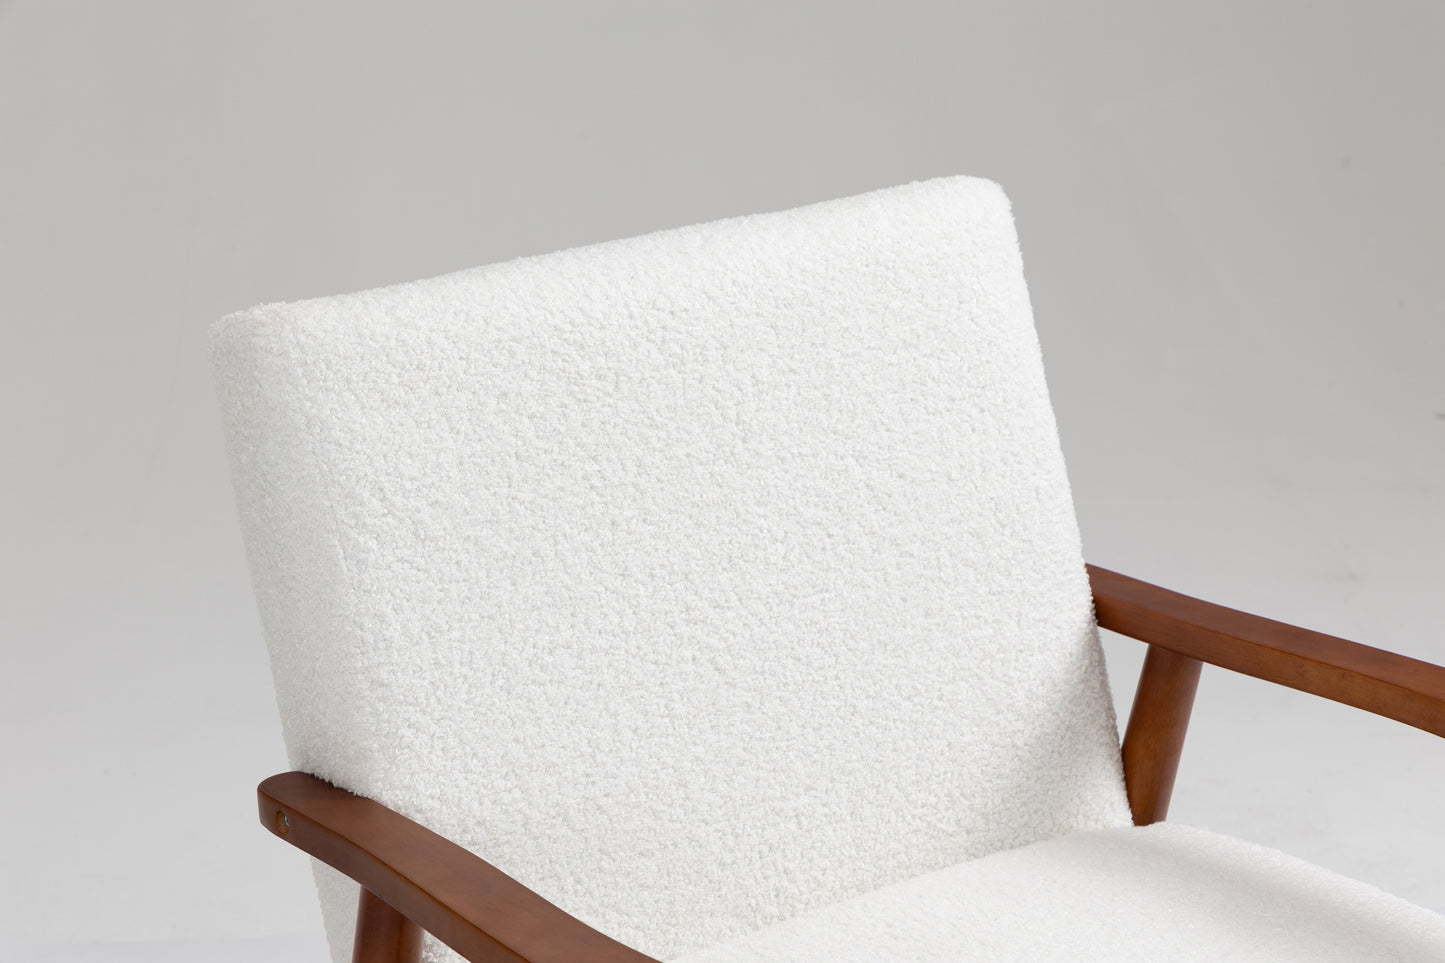 Solid wood upholstered armchair - Teddy bear white